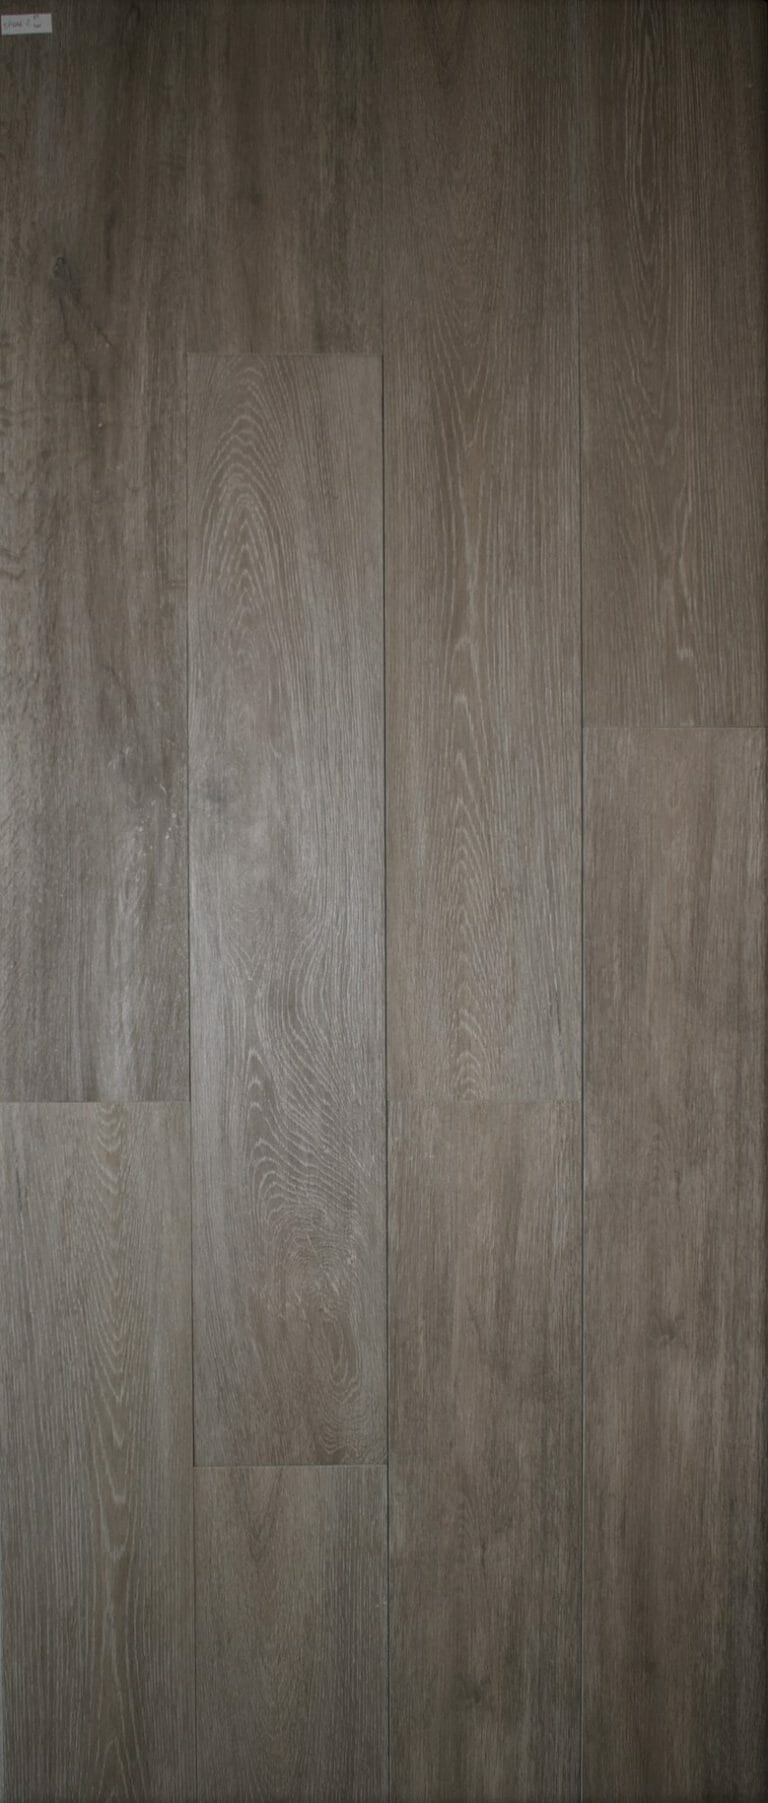 Canada Chestnut is a porcelain tile with wood grains. It looks like wood.